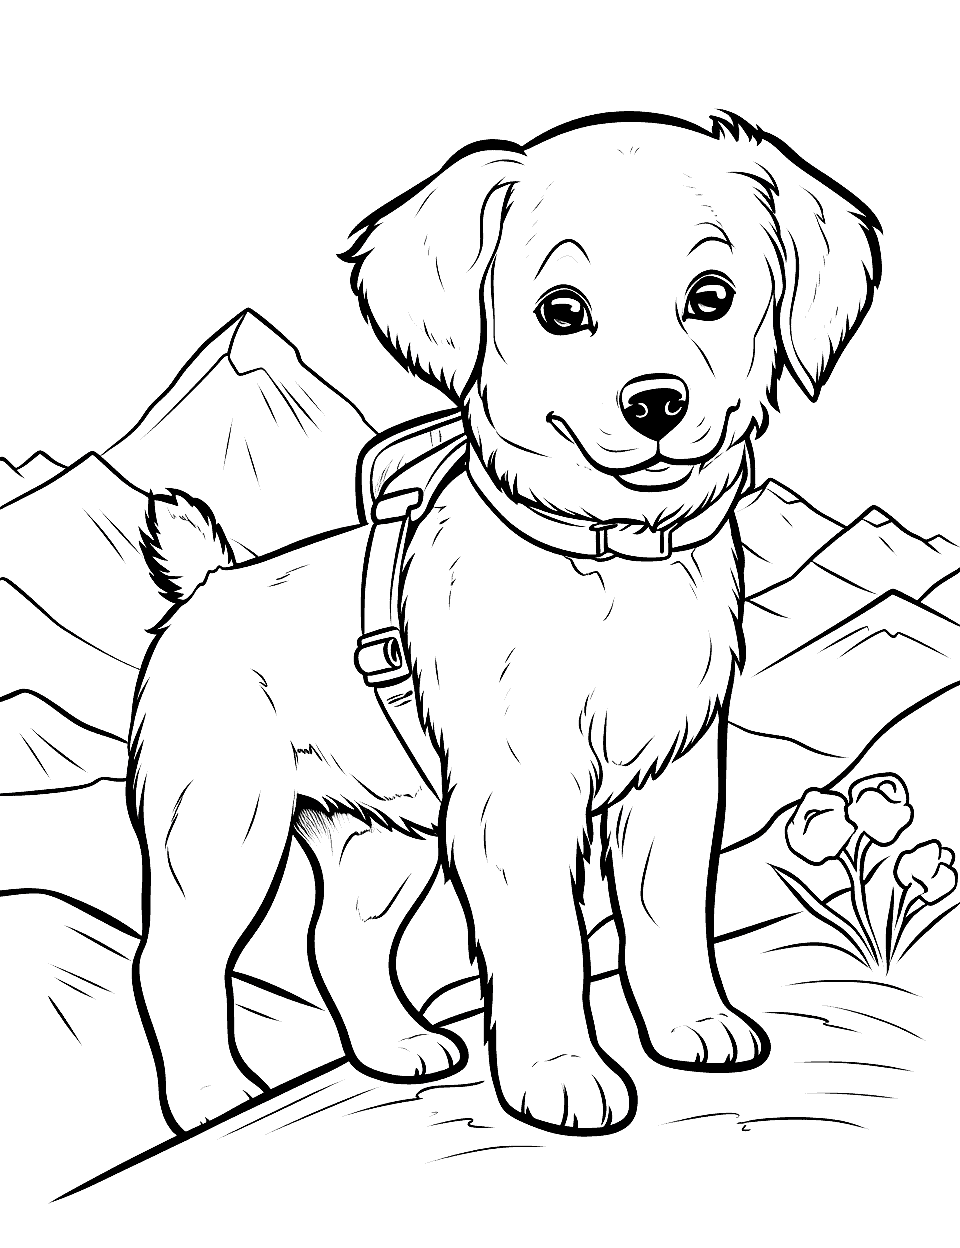 Outdoor Adventure Golden Retriever on a Hike Puppy Coloring Page - A Golden Retriever puppy on a scenic hike, exploring the wilderness.